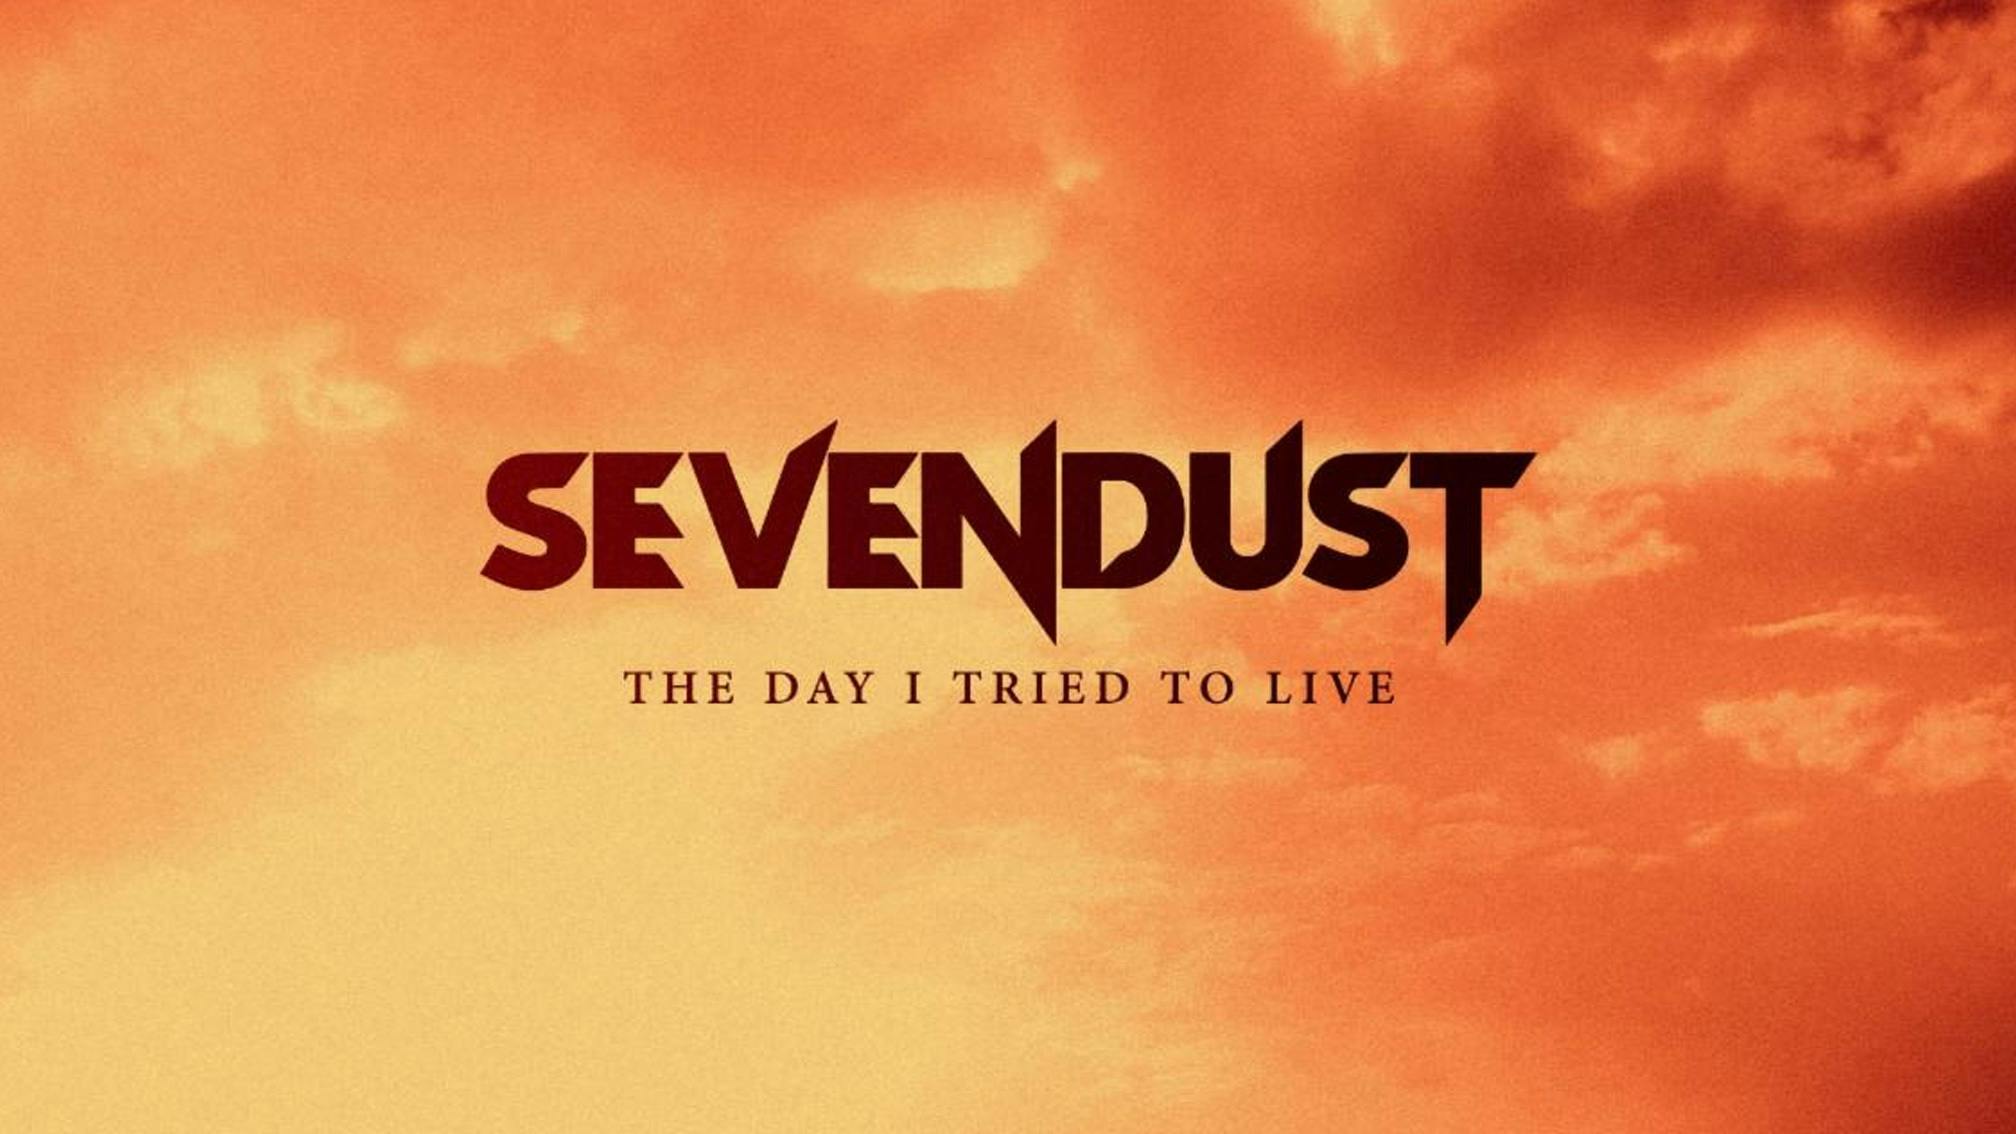 Sevendust Have Covered Soundgarden's The Day I Tried To Live